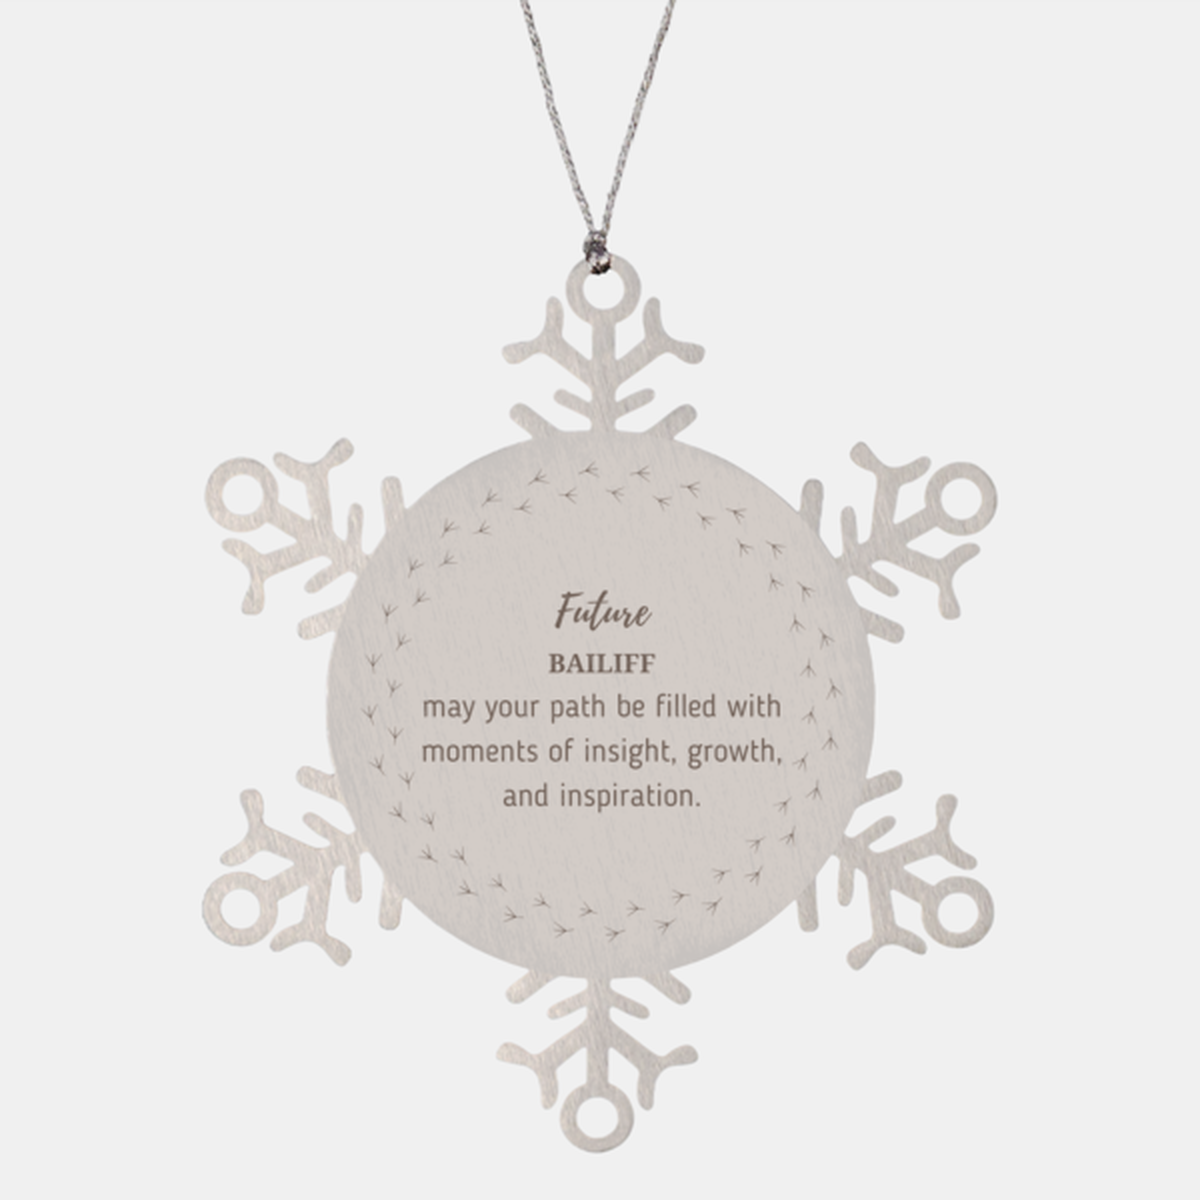 Future Bailiff Gifts, May your path be filled with moments of insight, Graduation Gifts for New Bailiff, Christmas Unique Snowflake Ornament For Men, Women, Friends